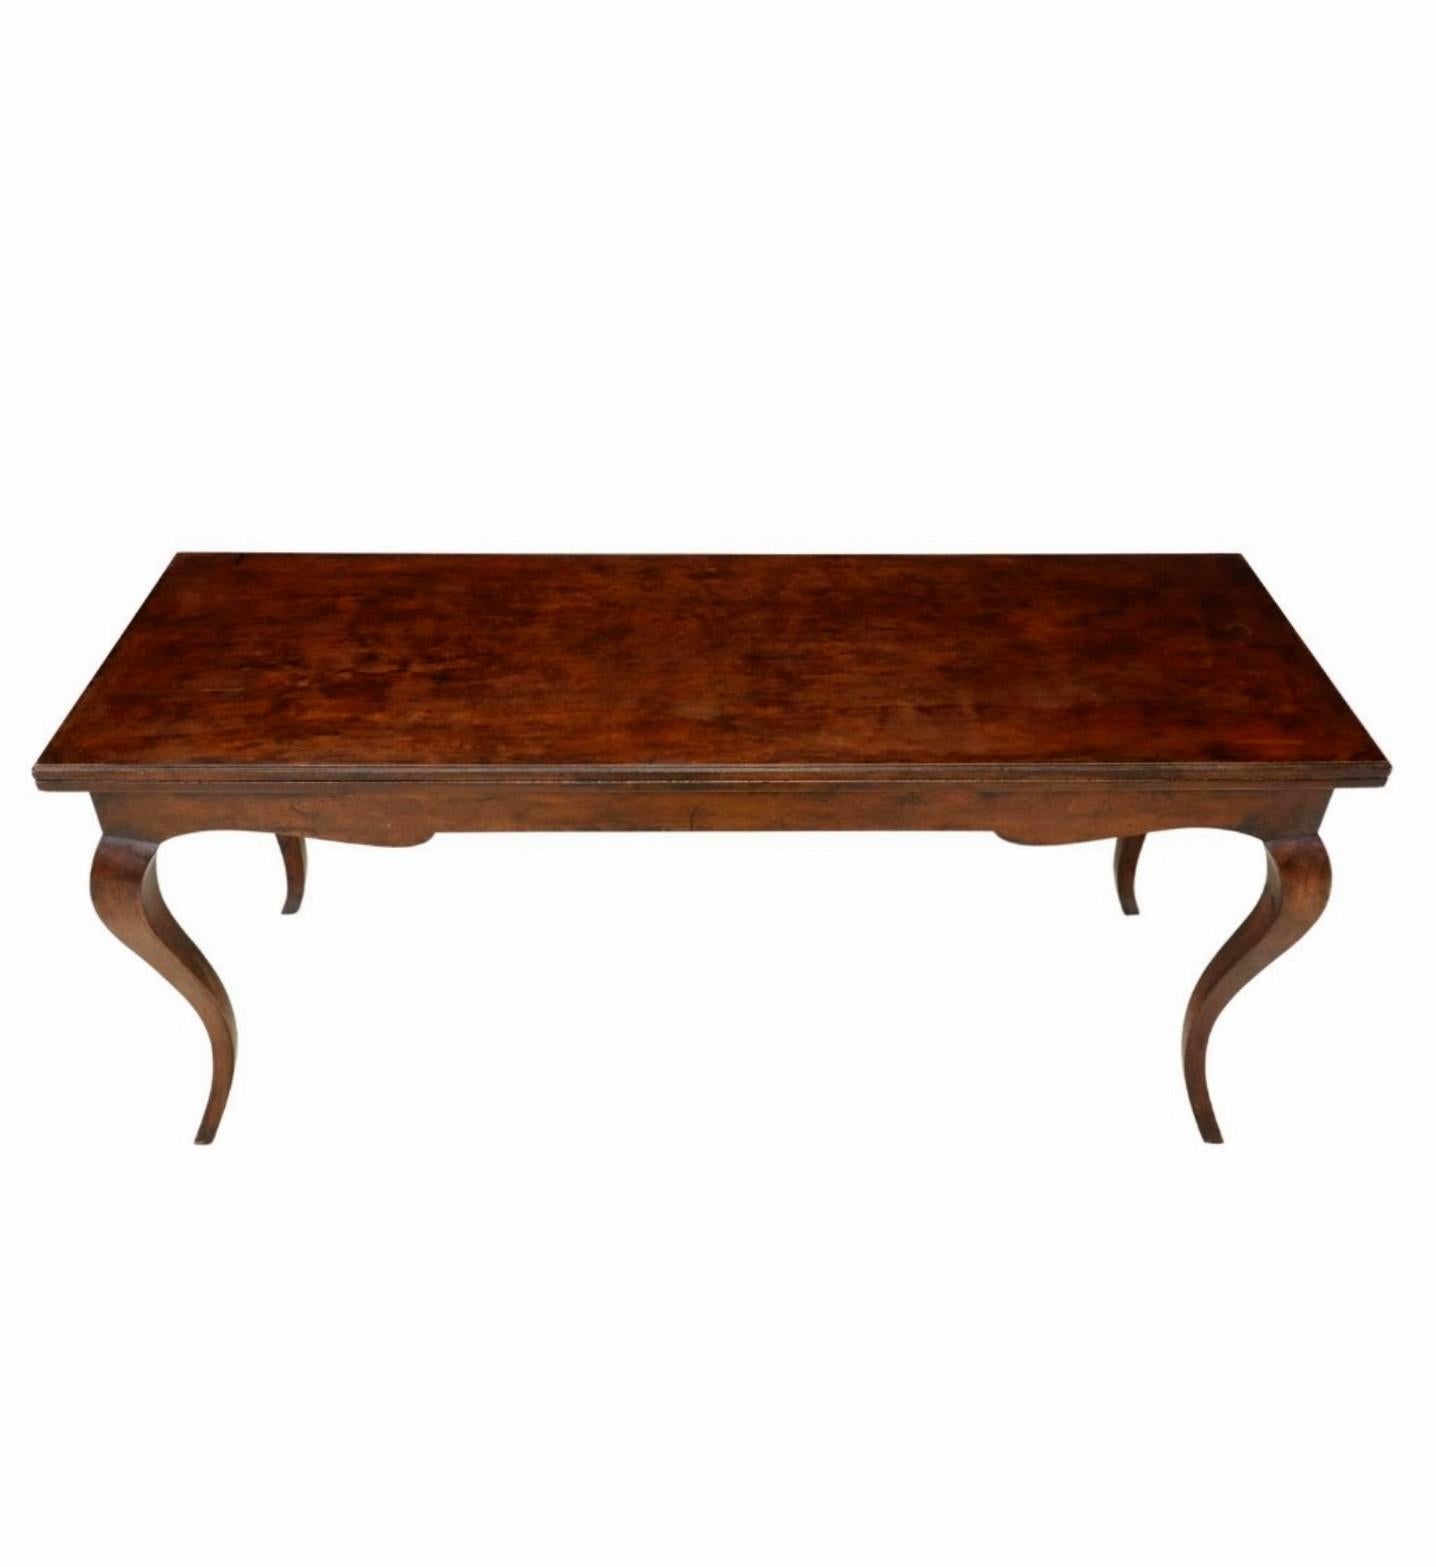 19th Century French Provincial Louis XV Style Flip-top Farmhouse Kitchen Table For Sale 2